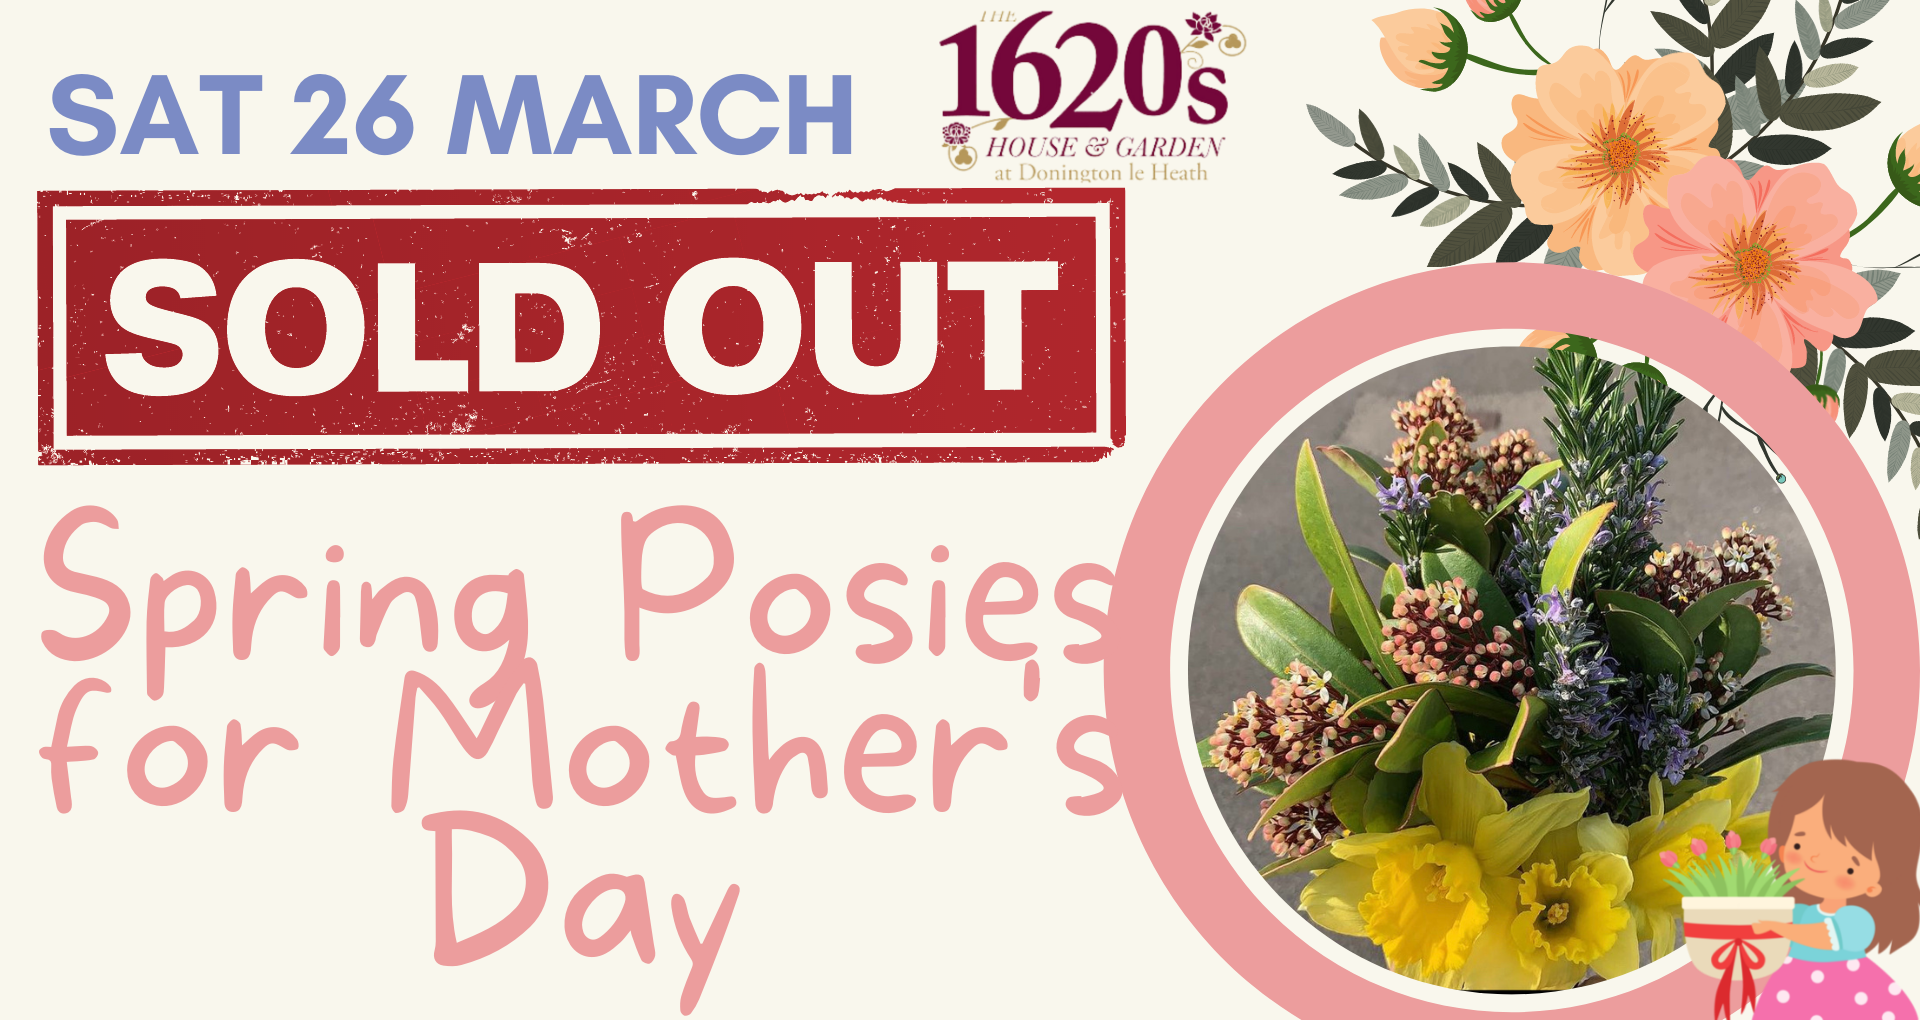 SOLD OUT Spring Posies for Mother's Day